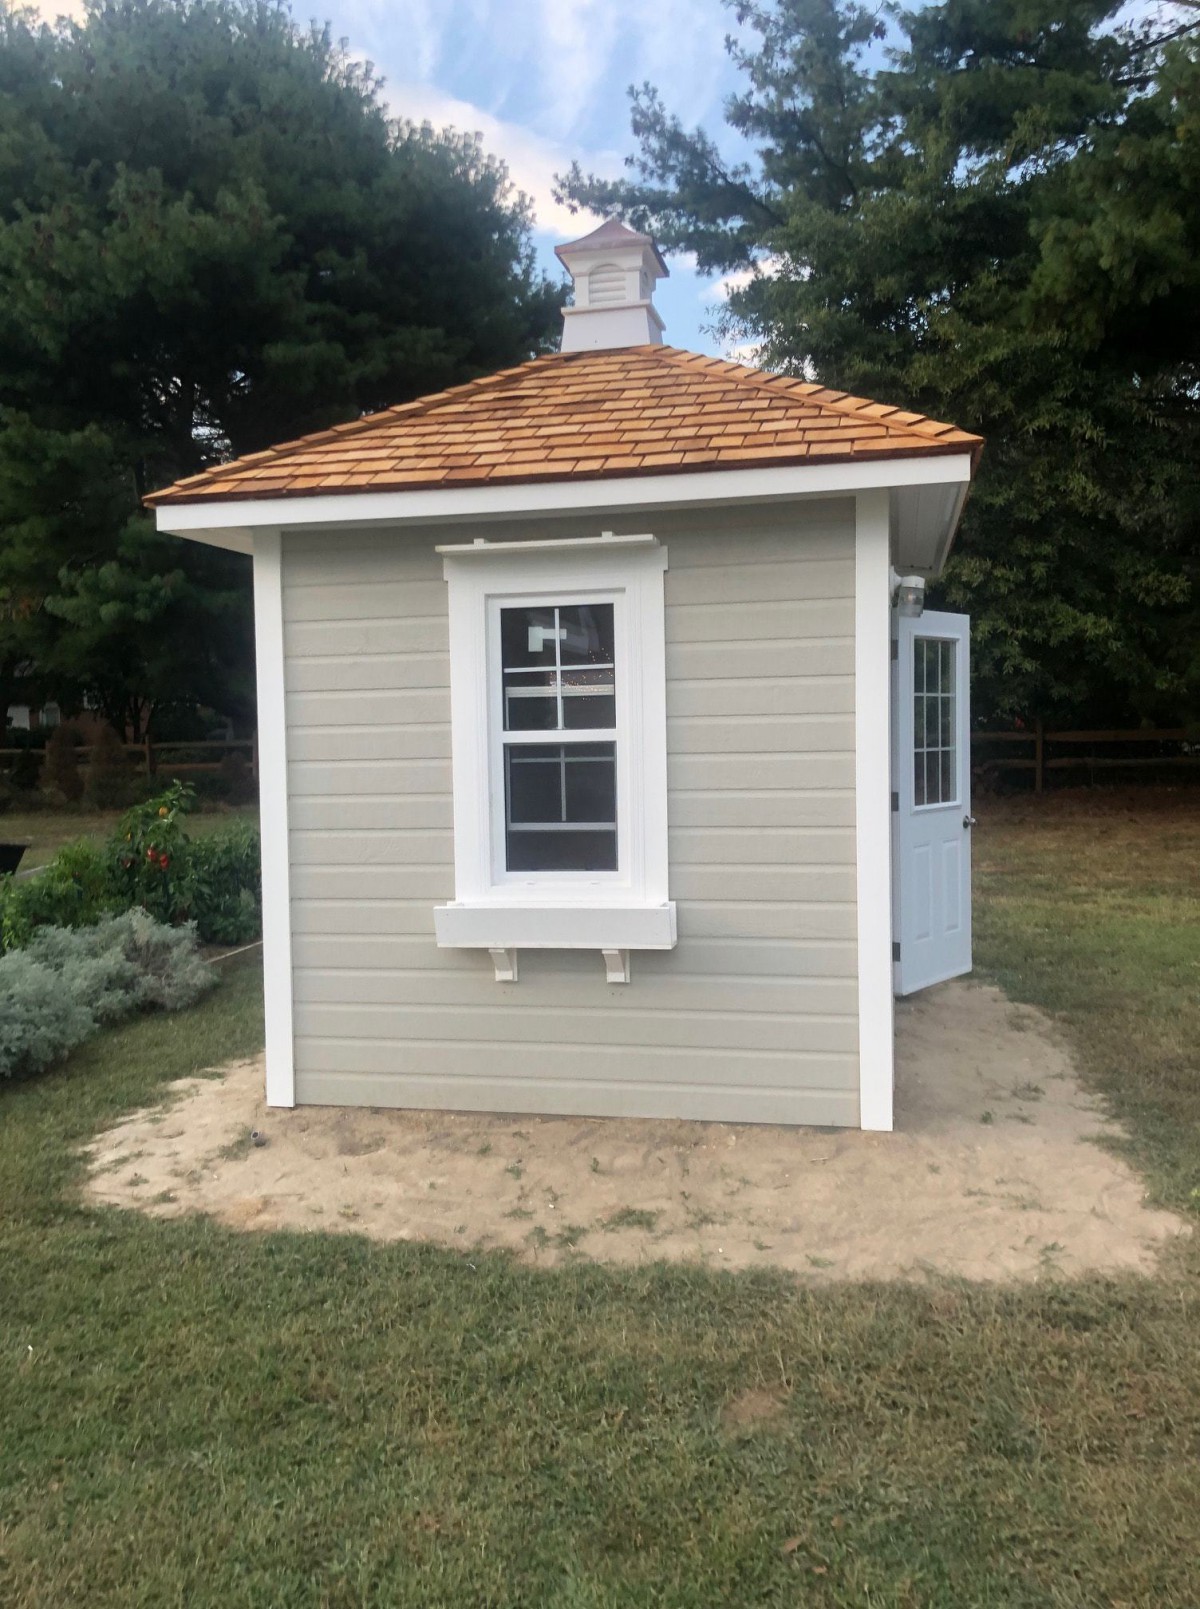 Backyard cedar Sonoma shed plan 8' x 8' featuring a cupola on the top as seen from side profile. Id number 5752.